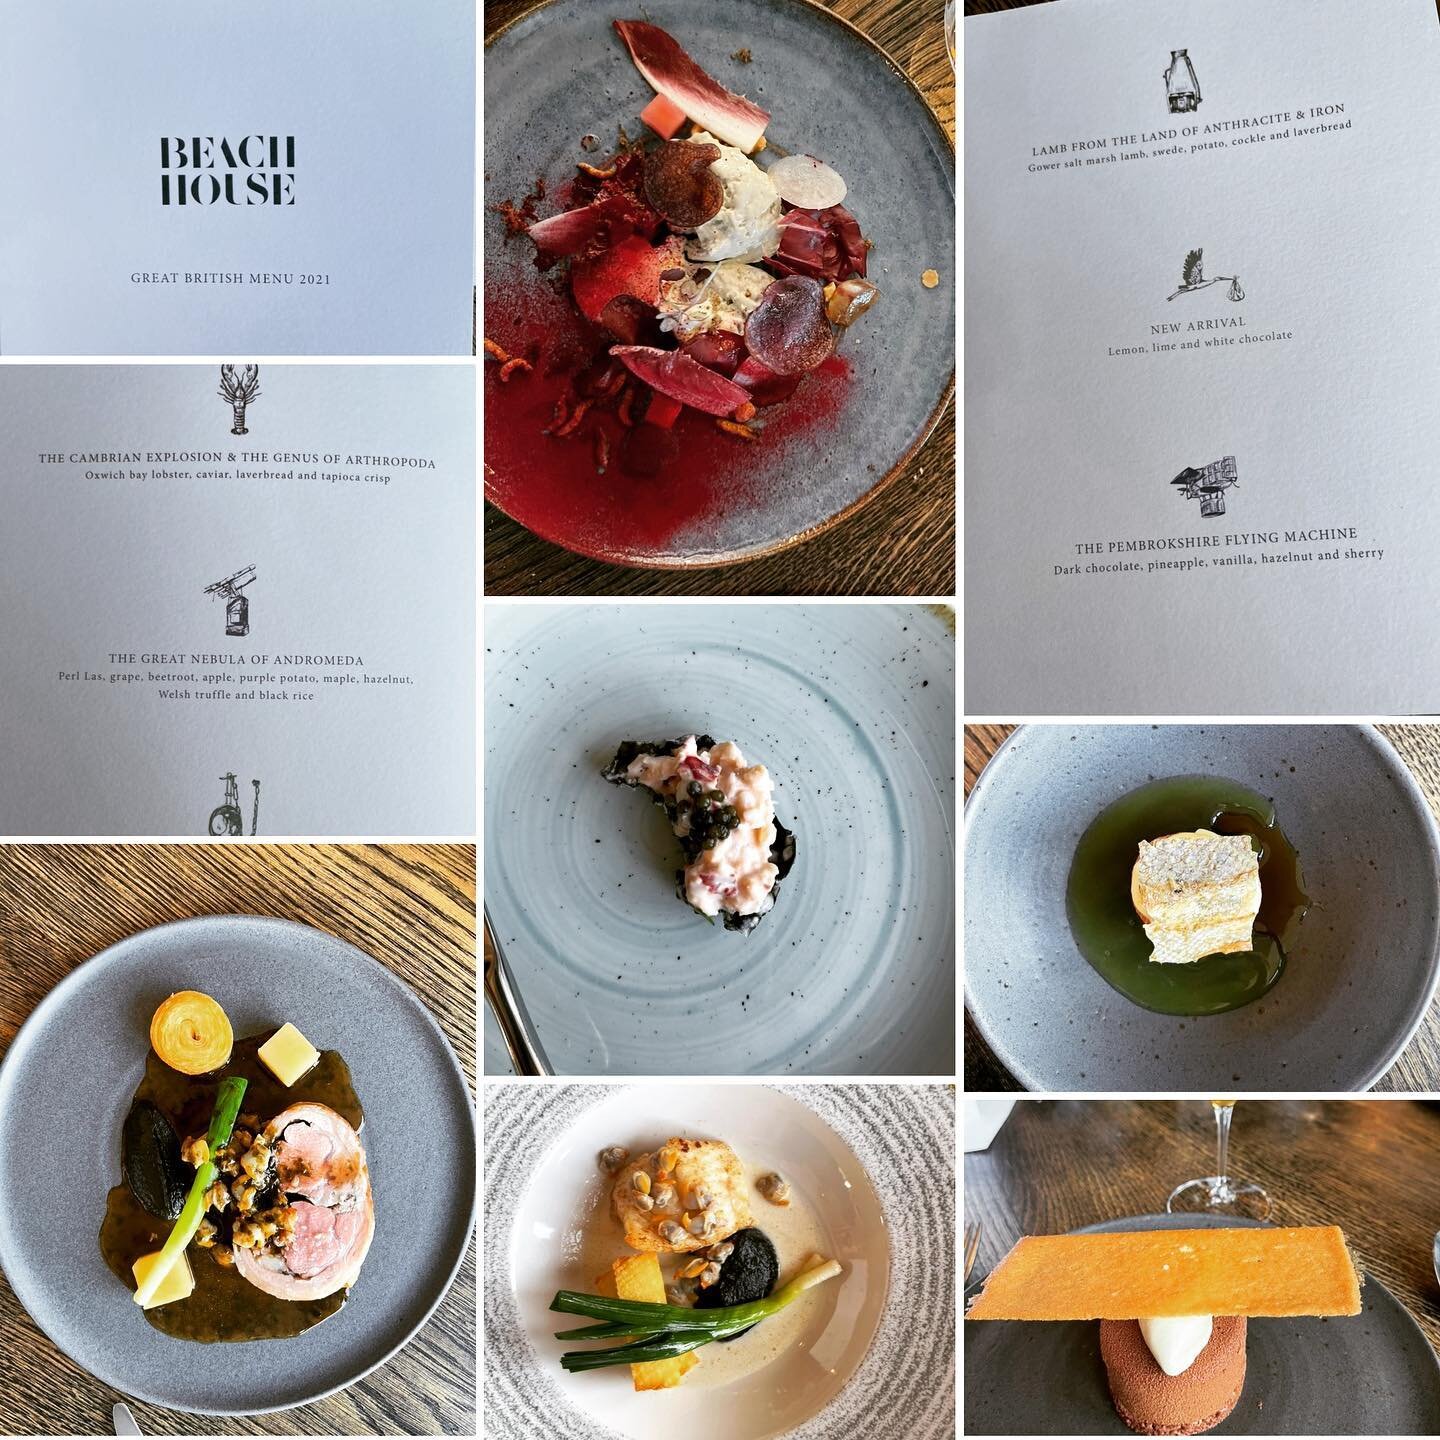 Great British Menu event at Beach House. The food was perfection. come and visit